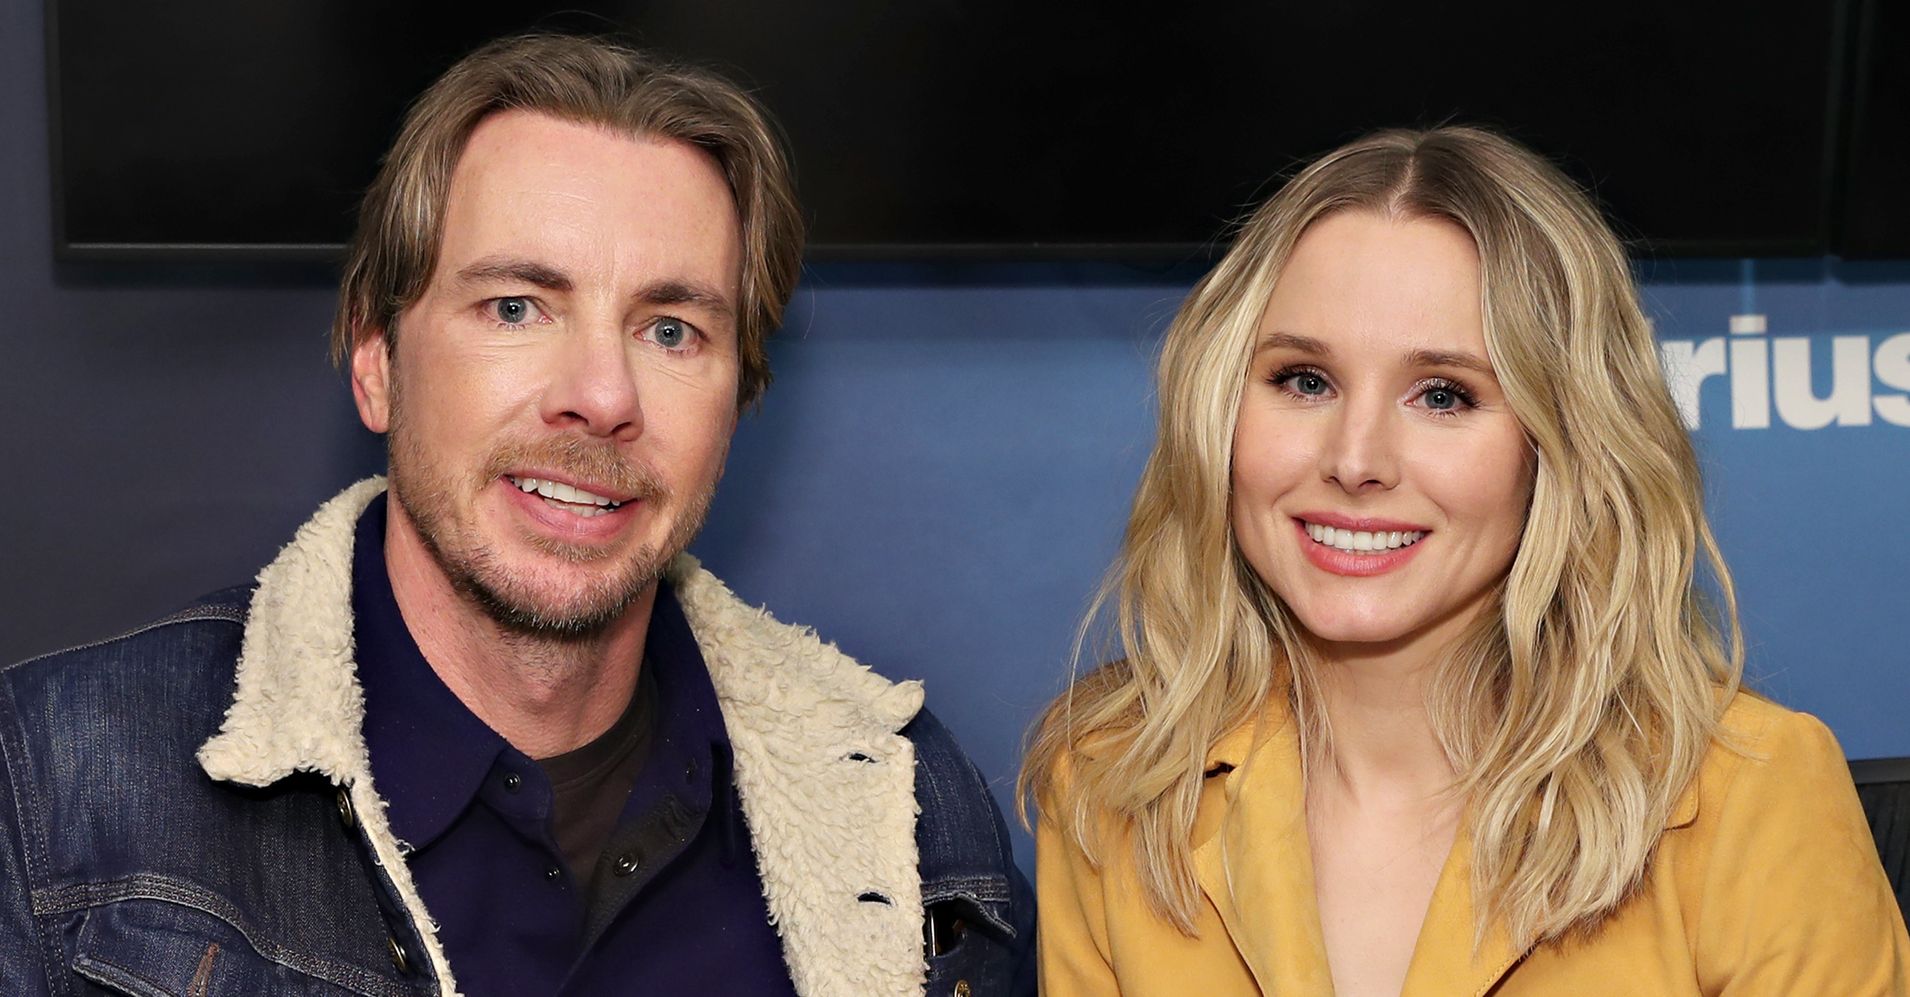 Kristen Bell And Dax Shepard Reveal Their Road To Marriage Was Pretty